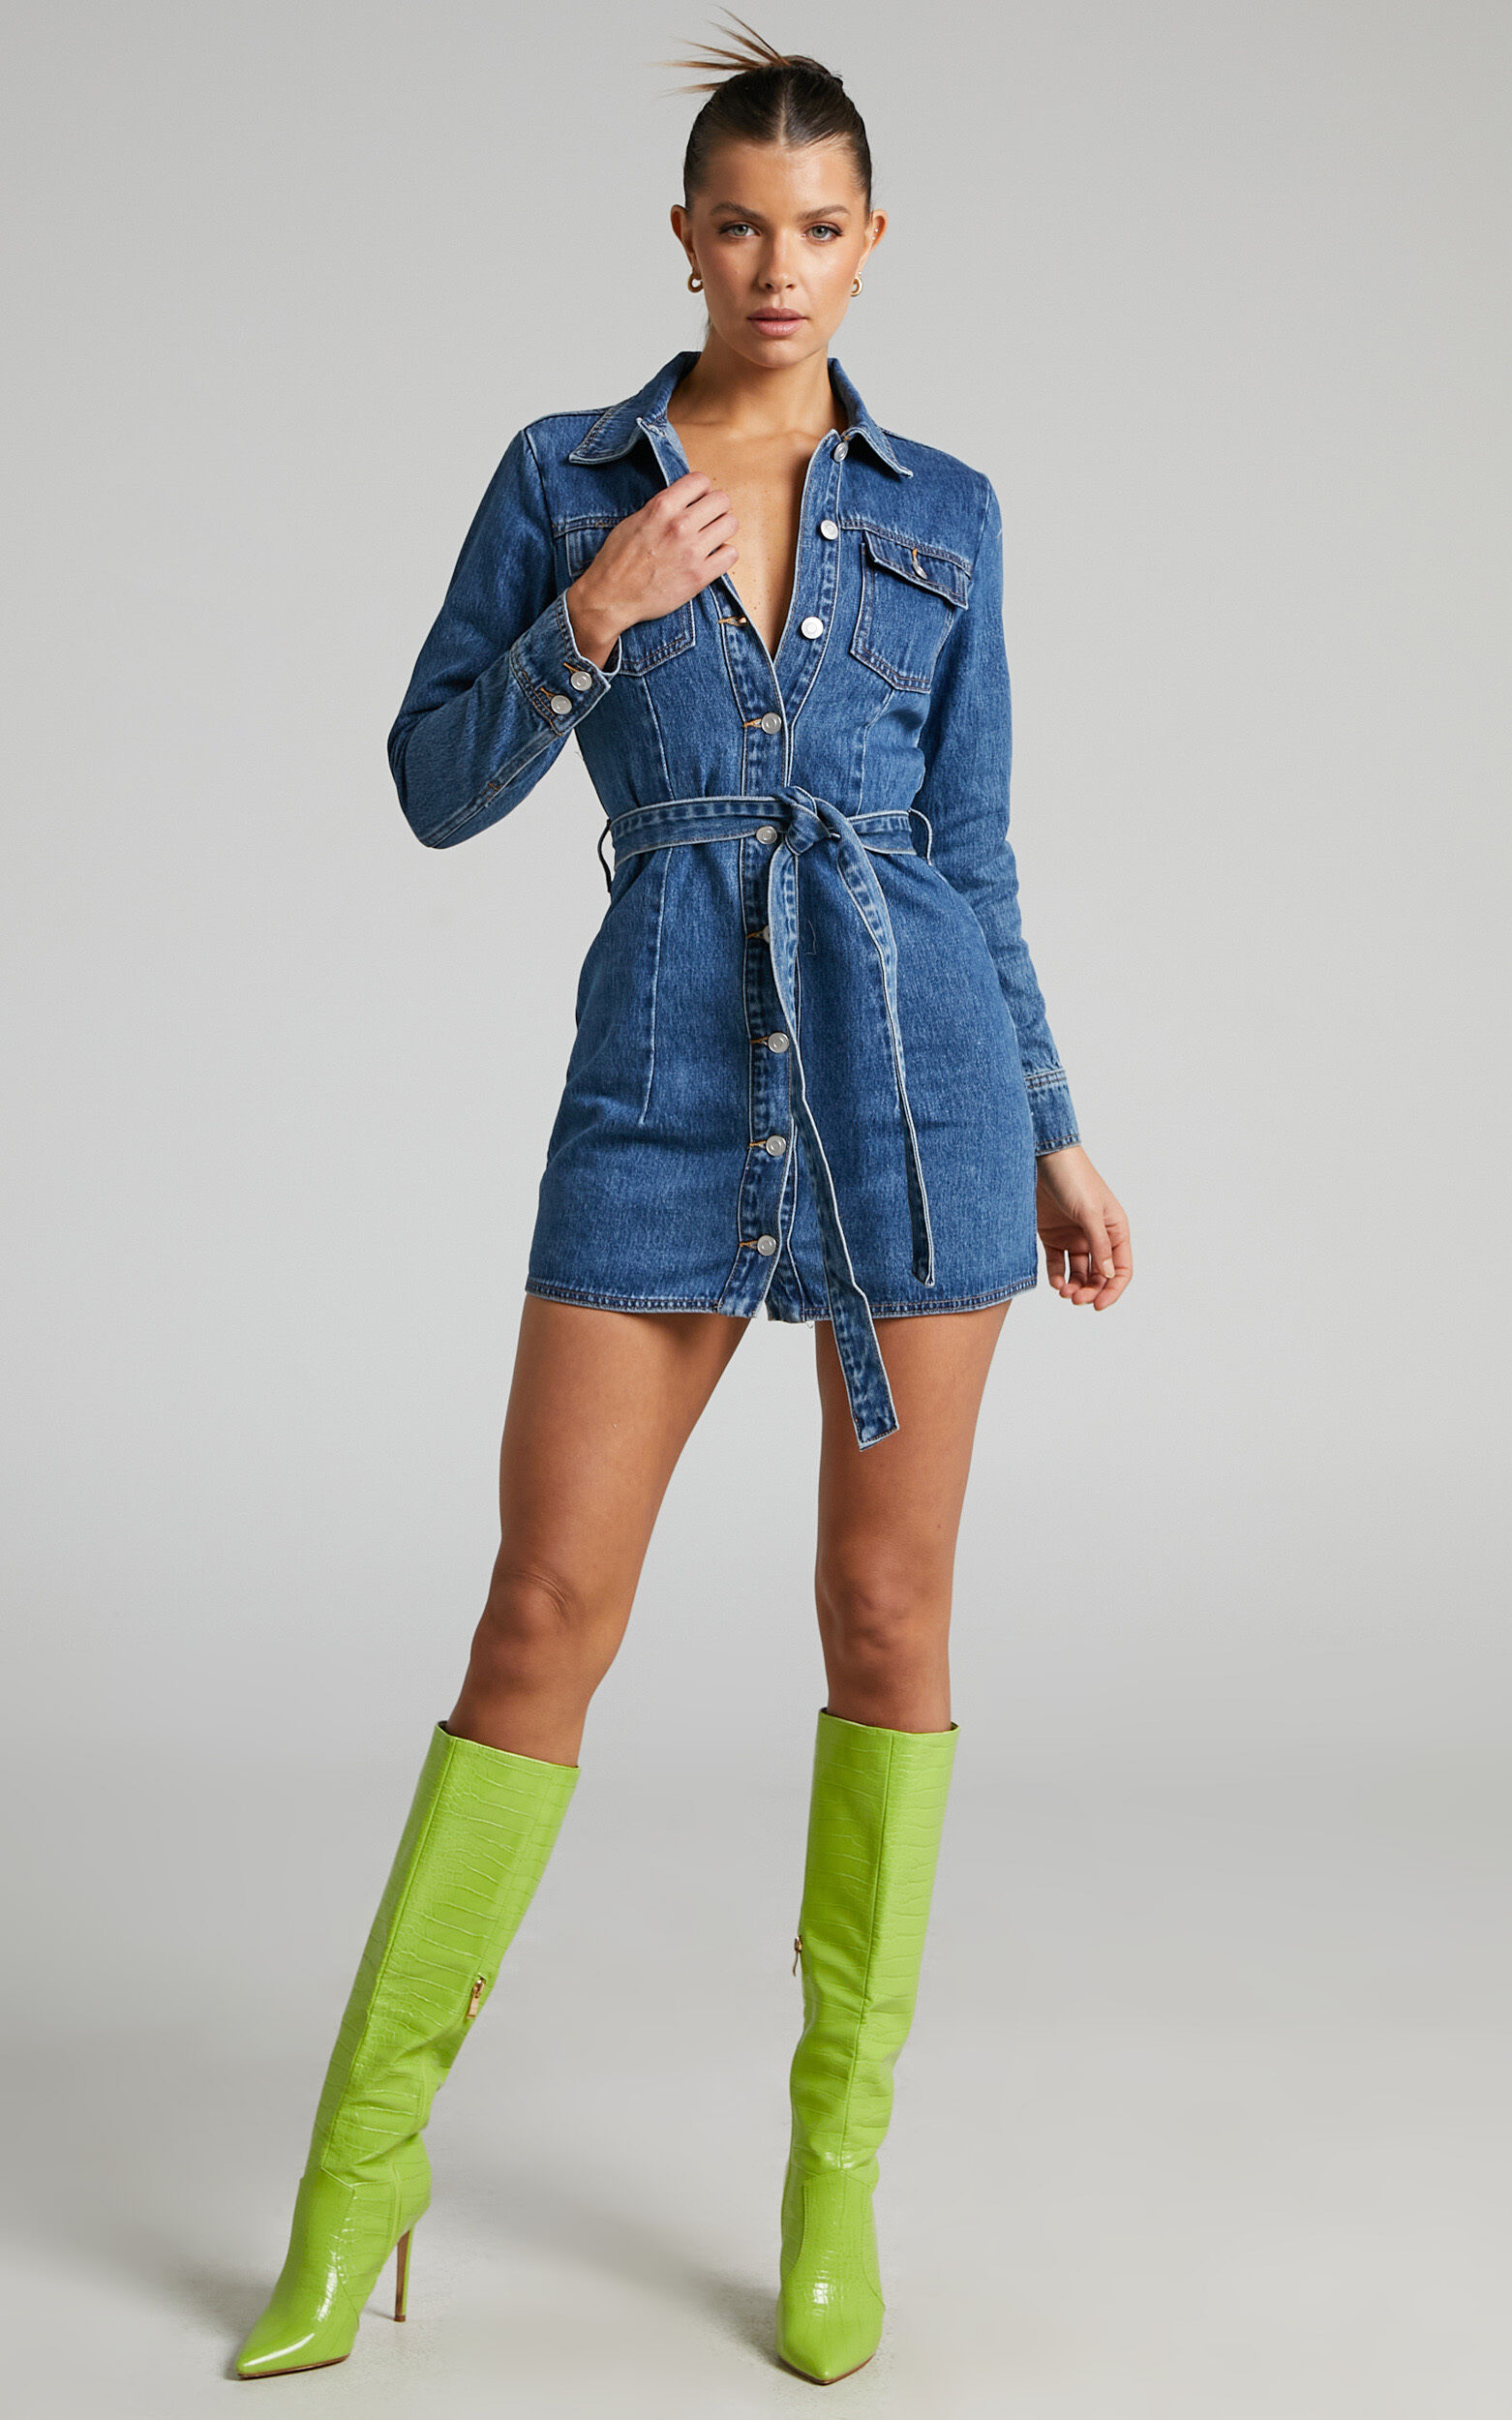 Enriquetta Recycled Cotton Long Sleeve Button Through Denim Mini Dress in Blue - 04, BLU1, super-hi-res image number null